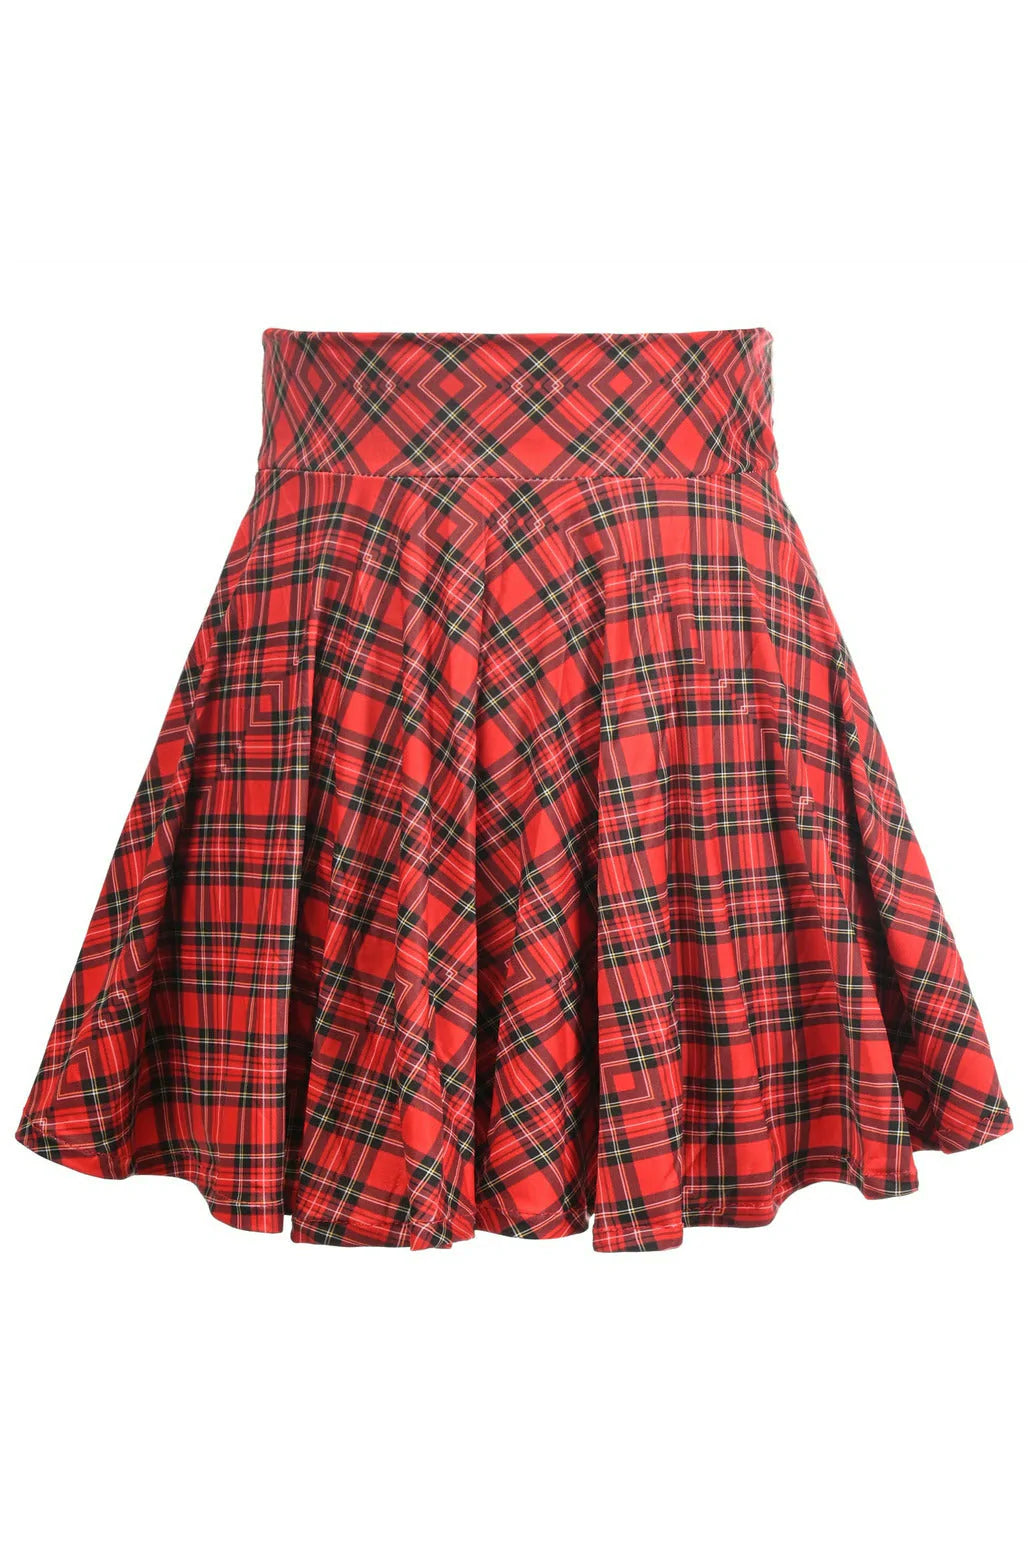 Load image into Gallery viewer, Red Plaid Stretch Lycra Skirt
